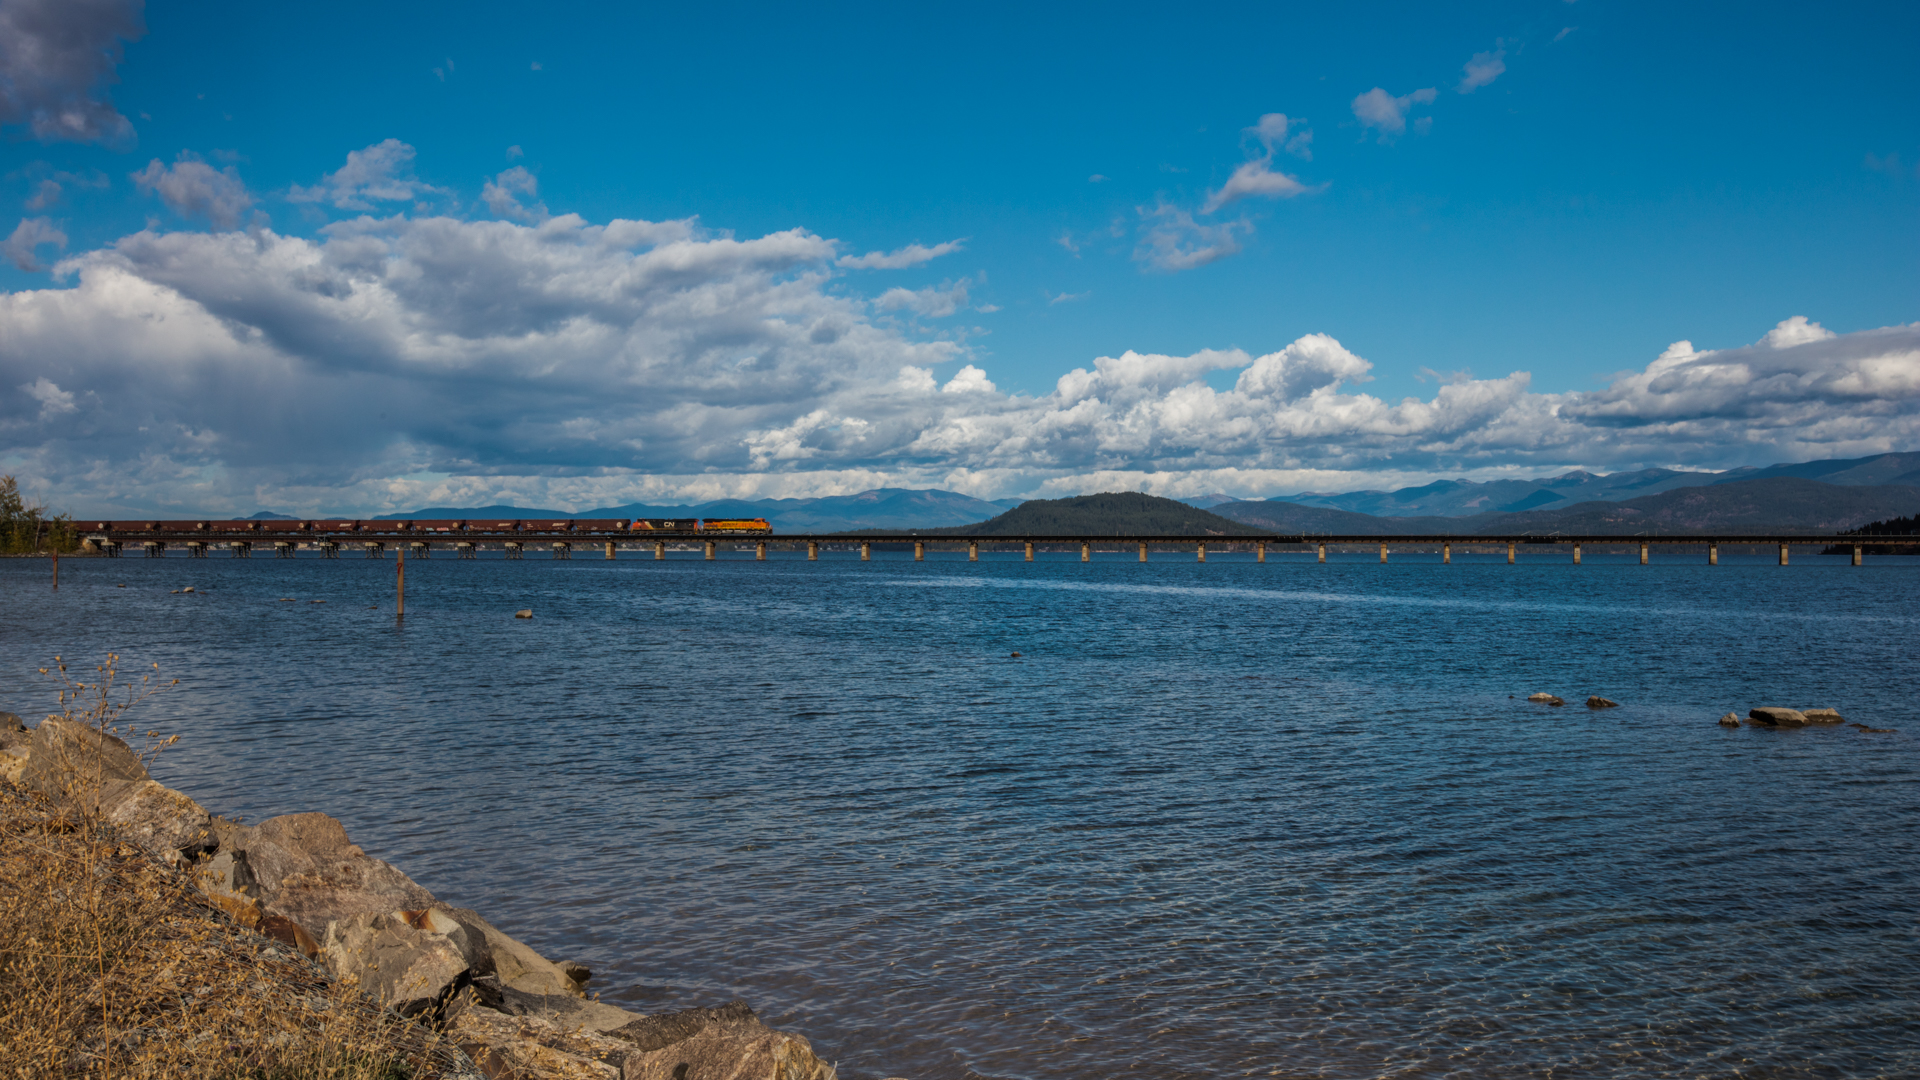 Lake Pend Oreille and the Train